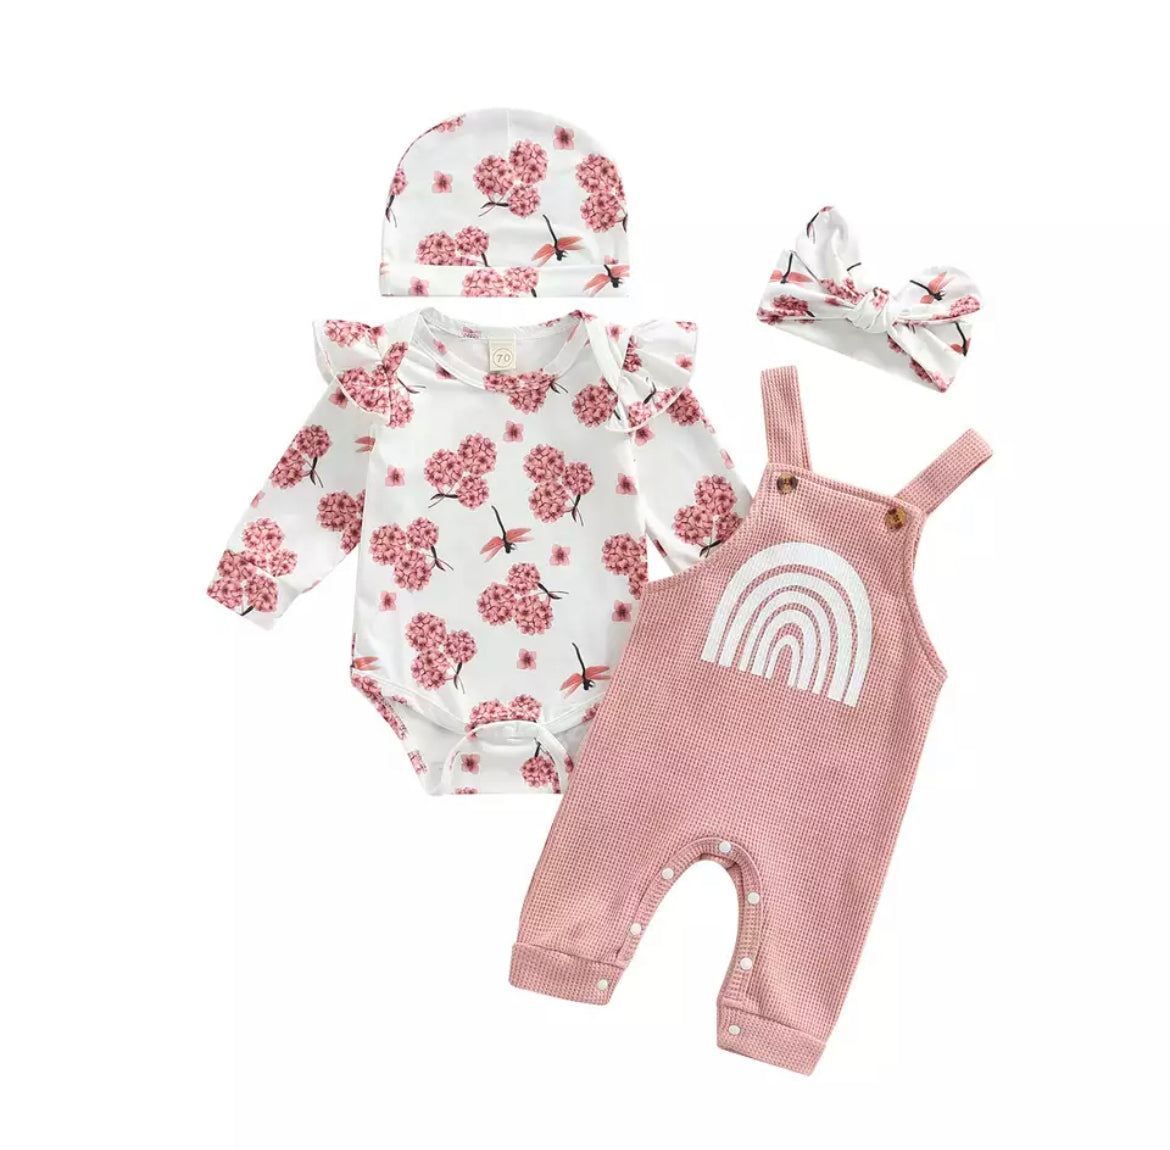 Floral Rainbow Overall Set - Pink.